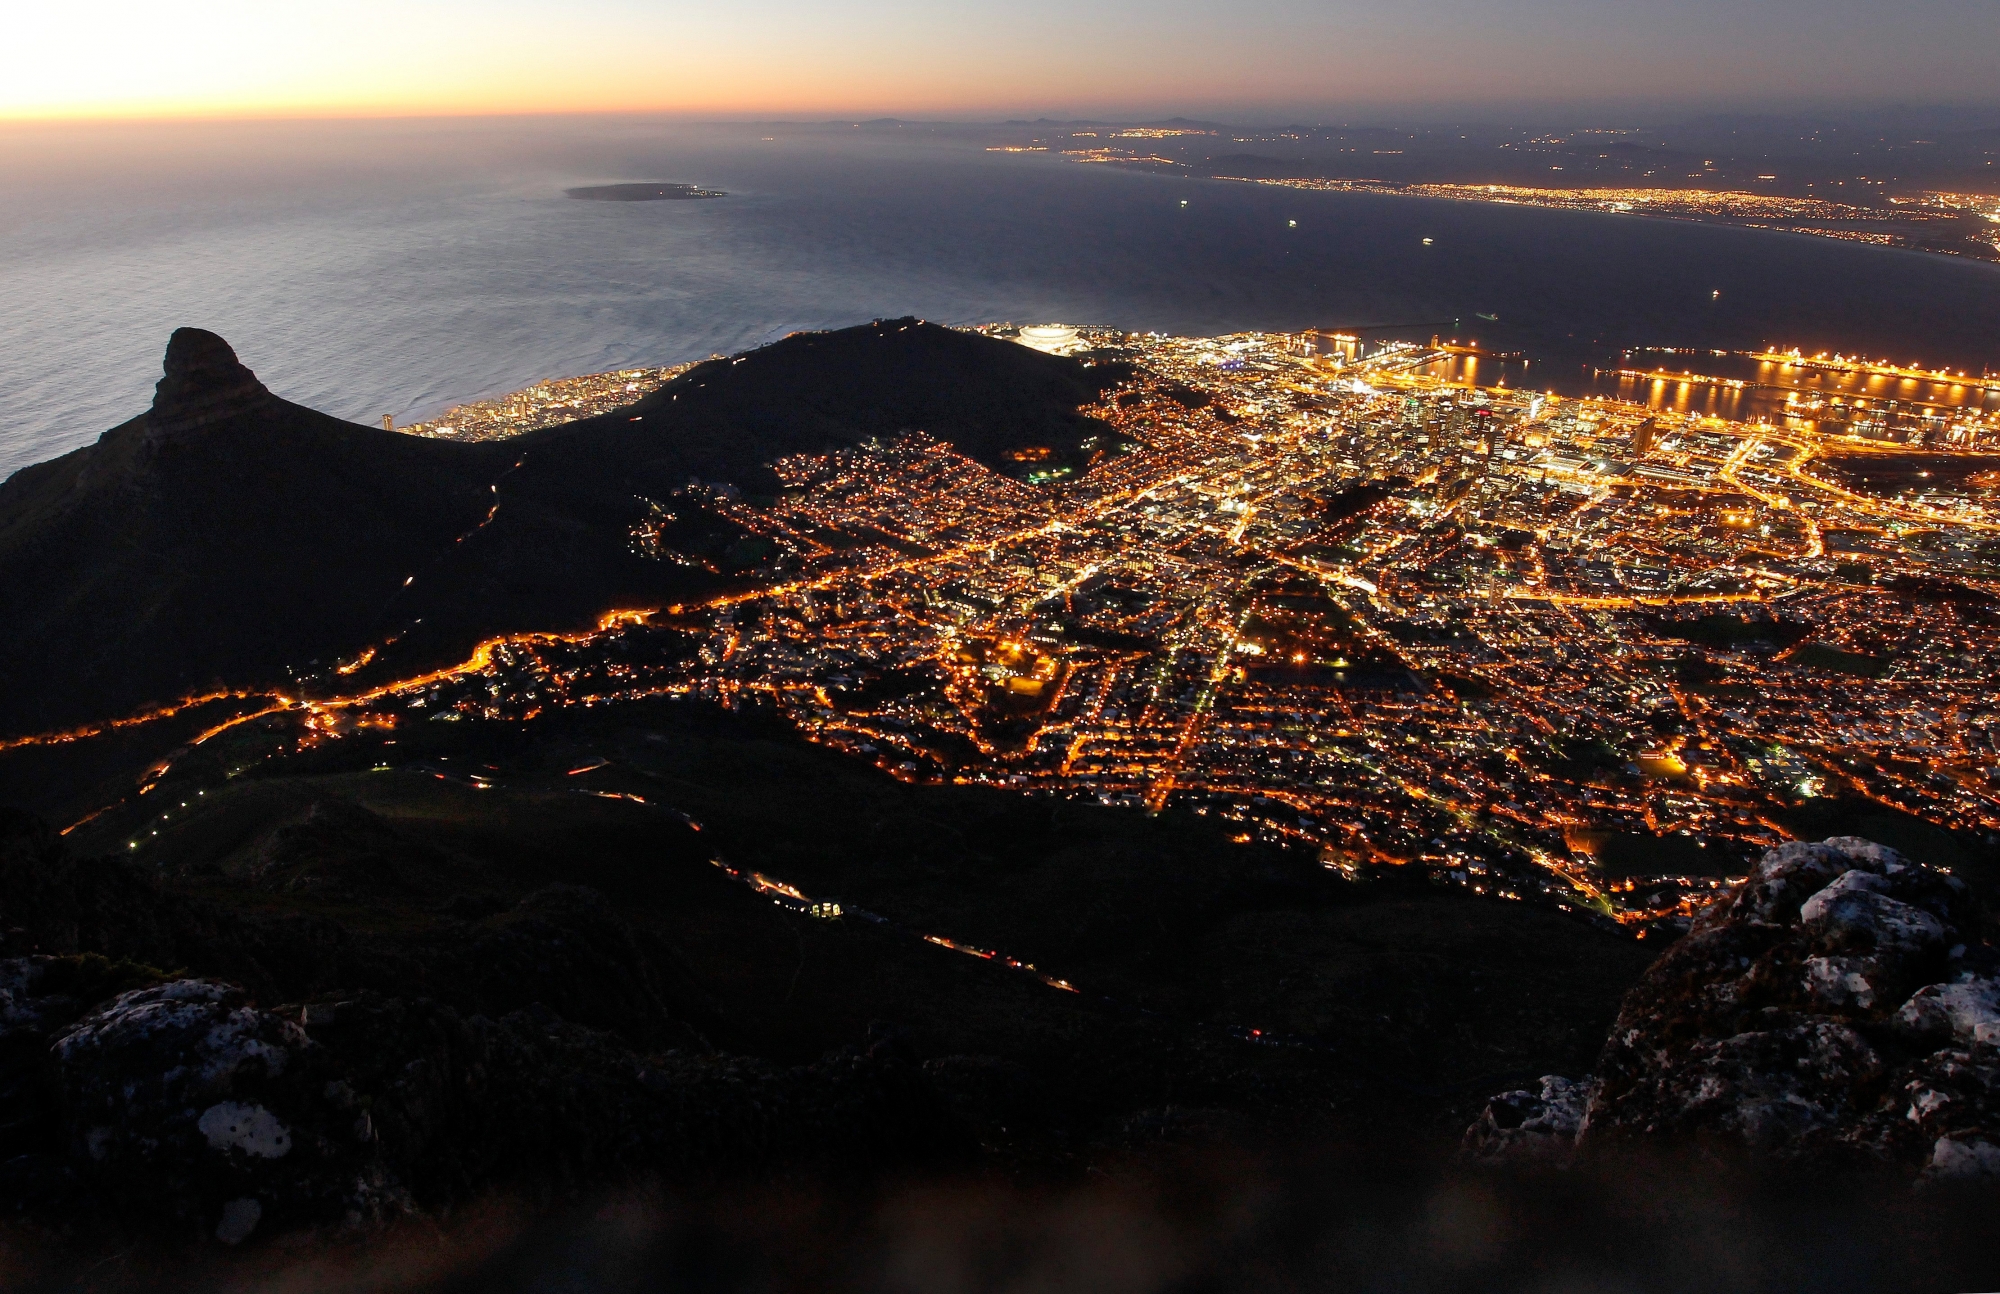 The city of Cape Town seen from the Table Mountain in Cape Town, South Africa, pictured on Wednesday, June 30, 2010. (KEYSTONE/Peter Klaunzer) SUEDAFRIKA KAPSTADT